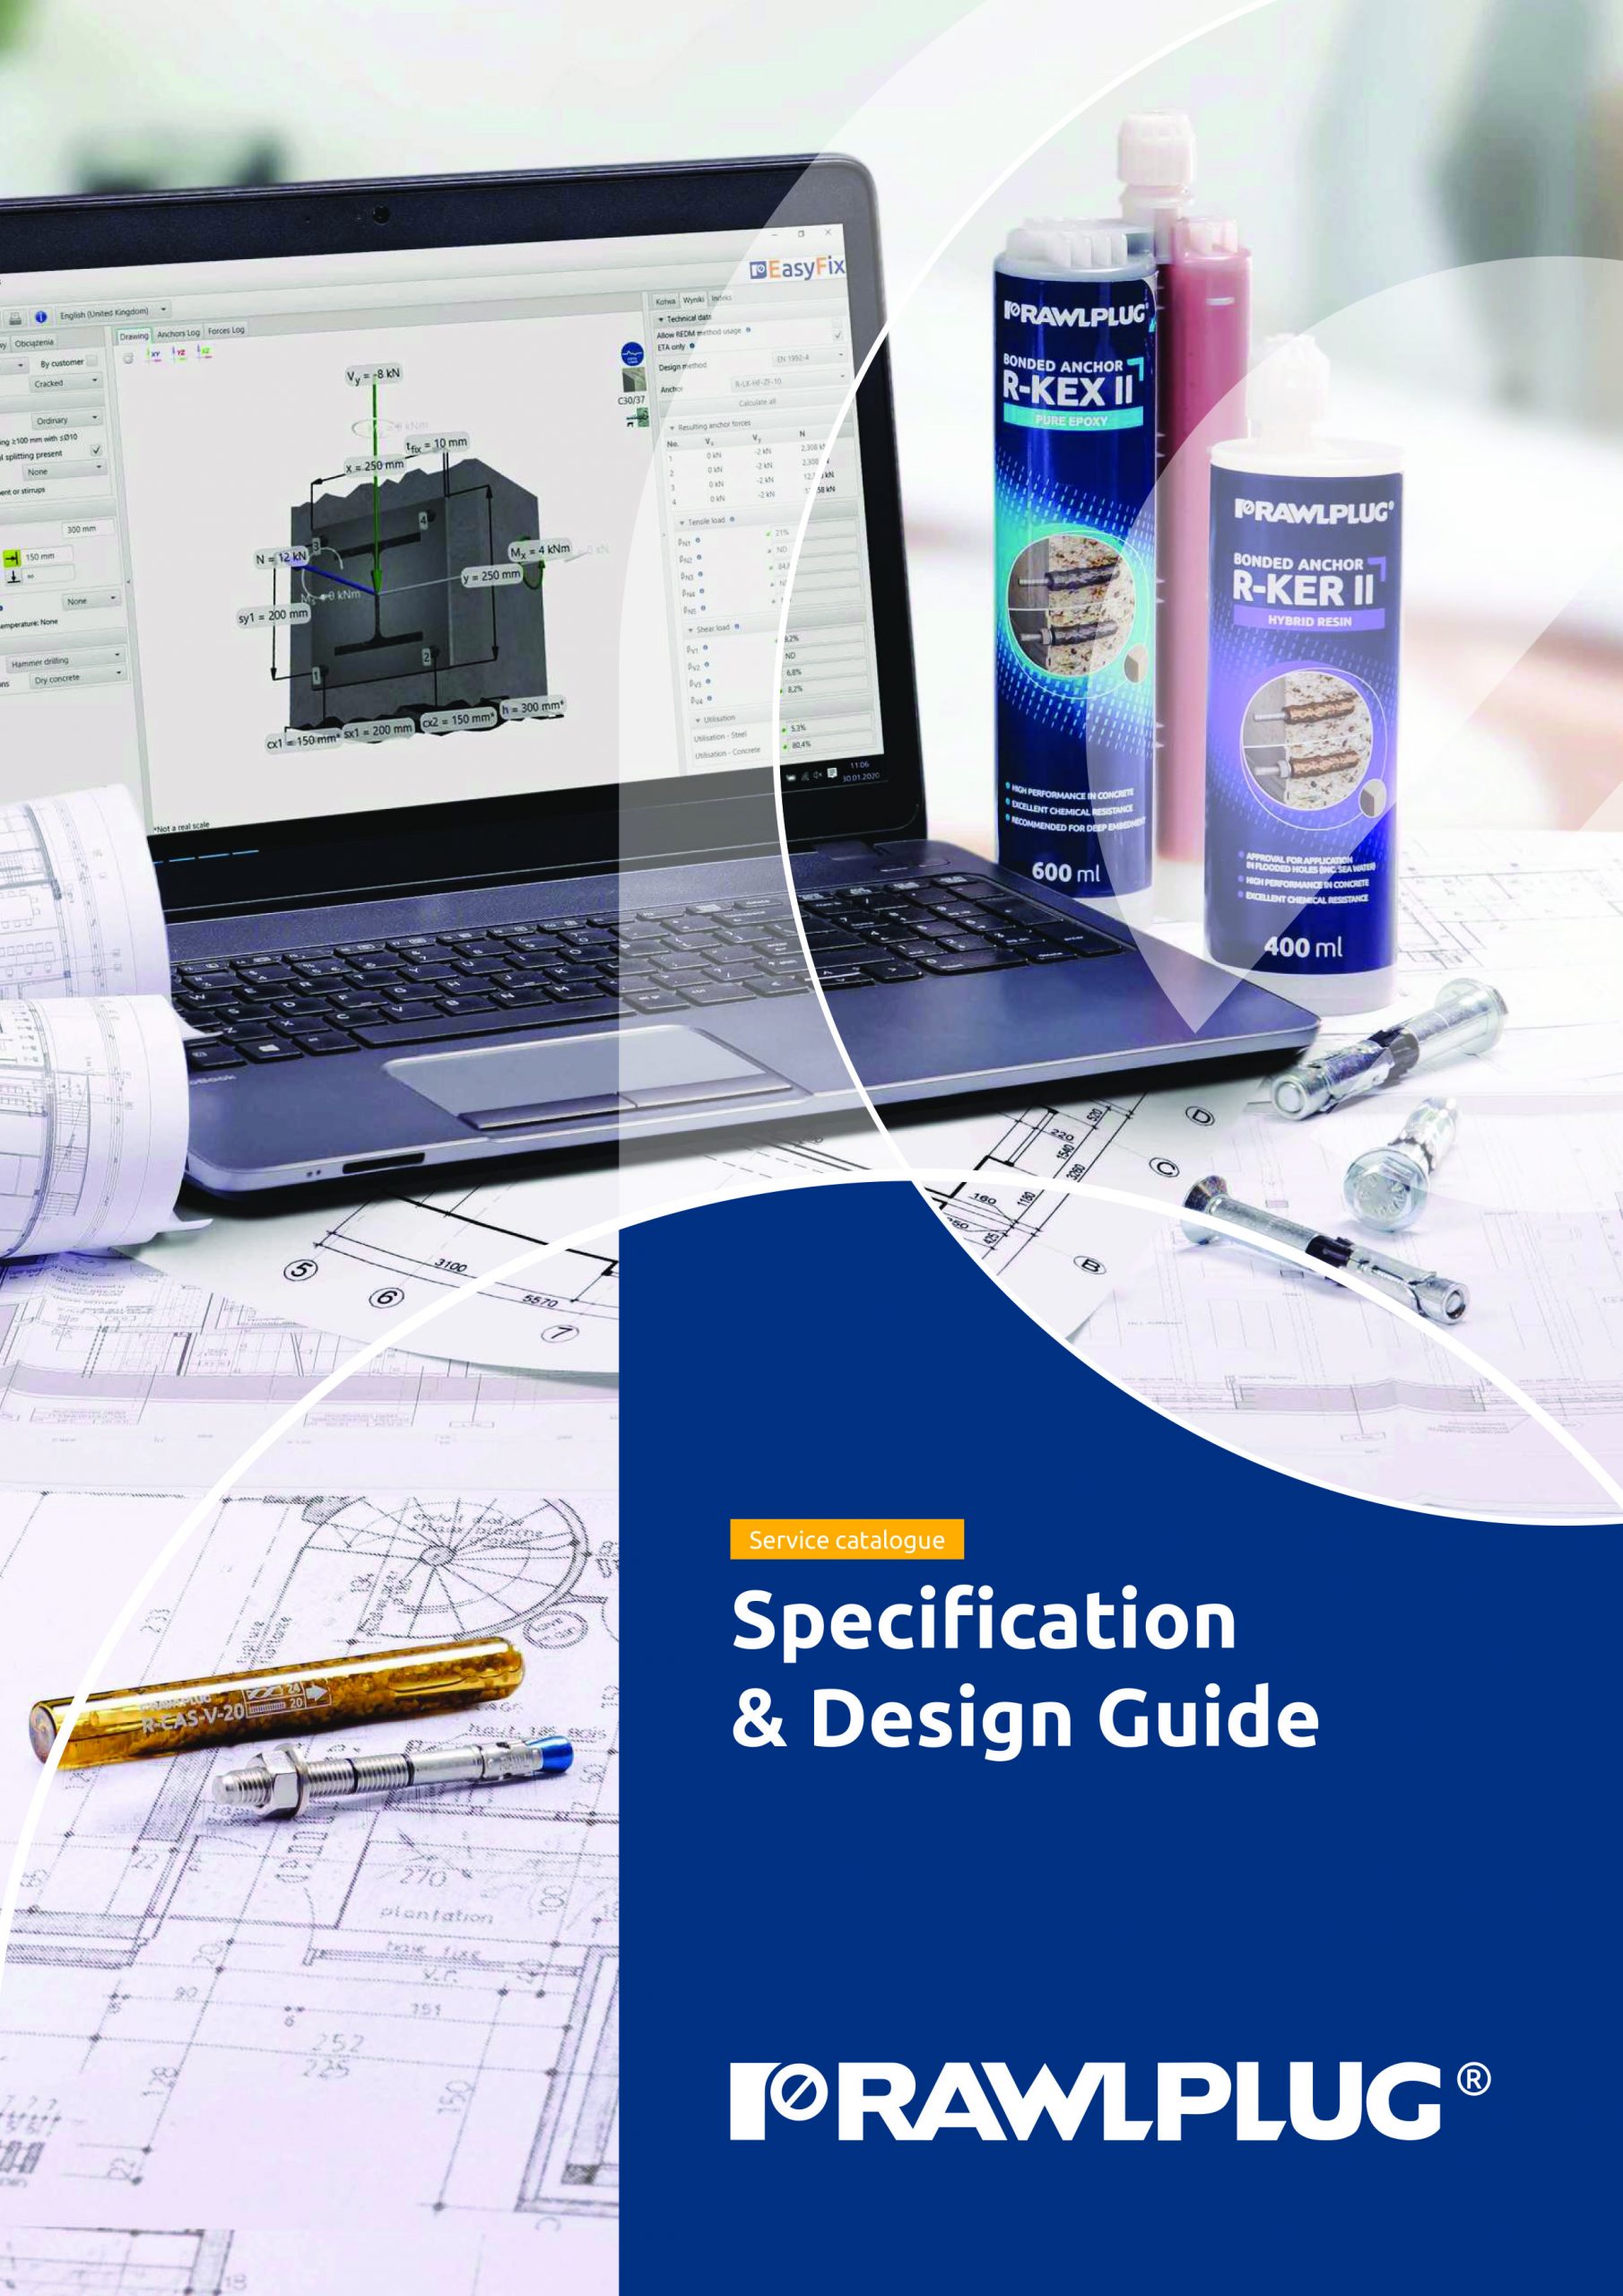 Specification & Design Guide